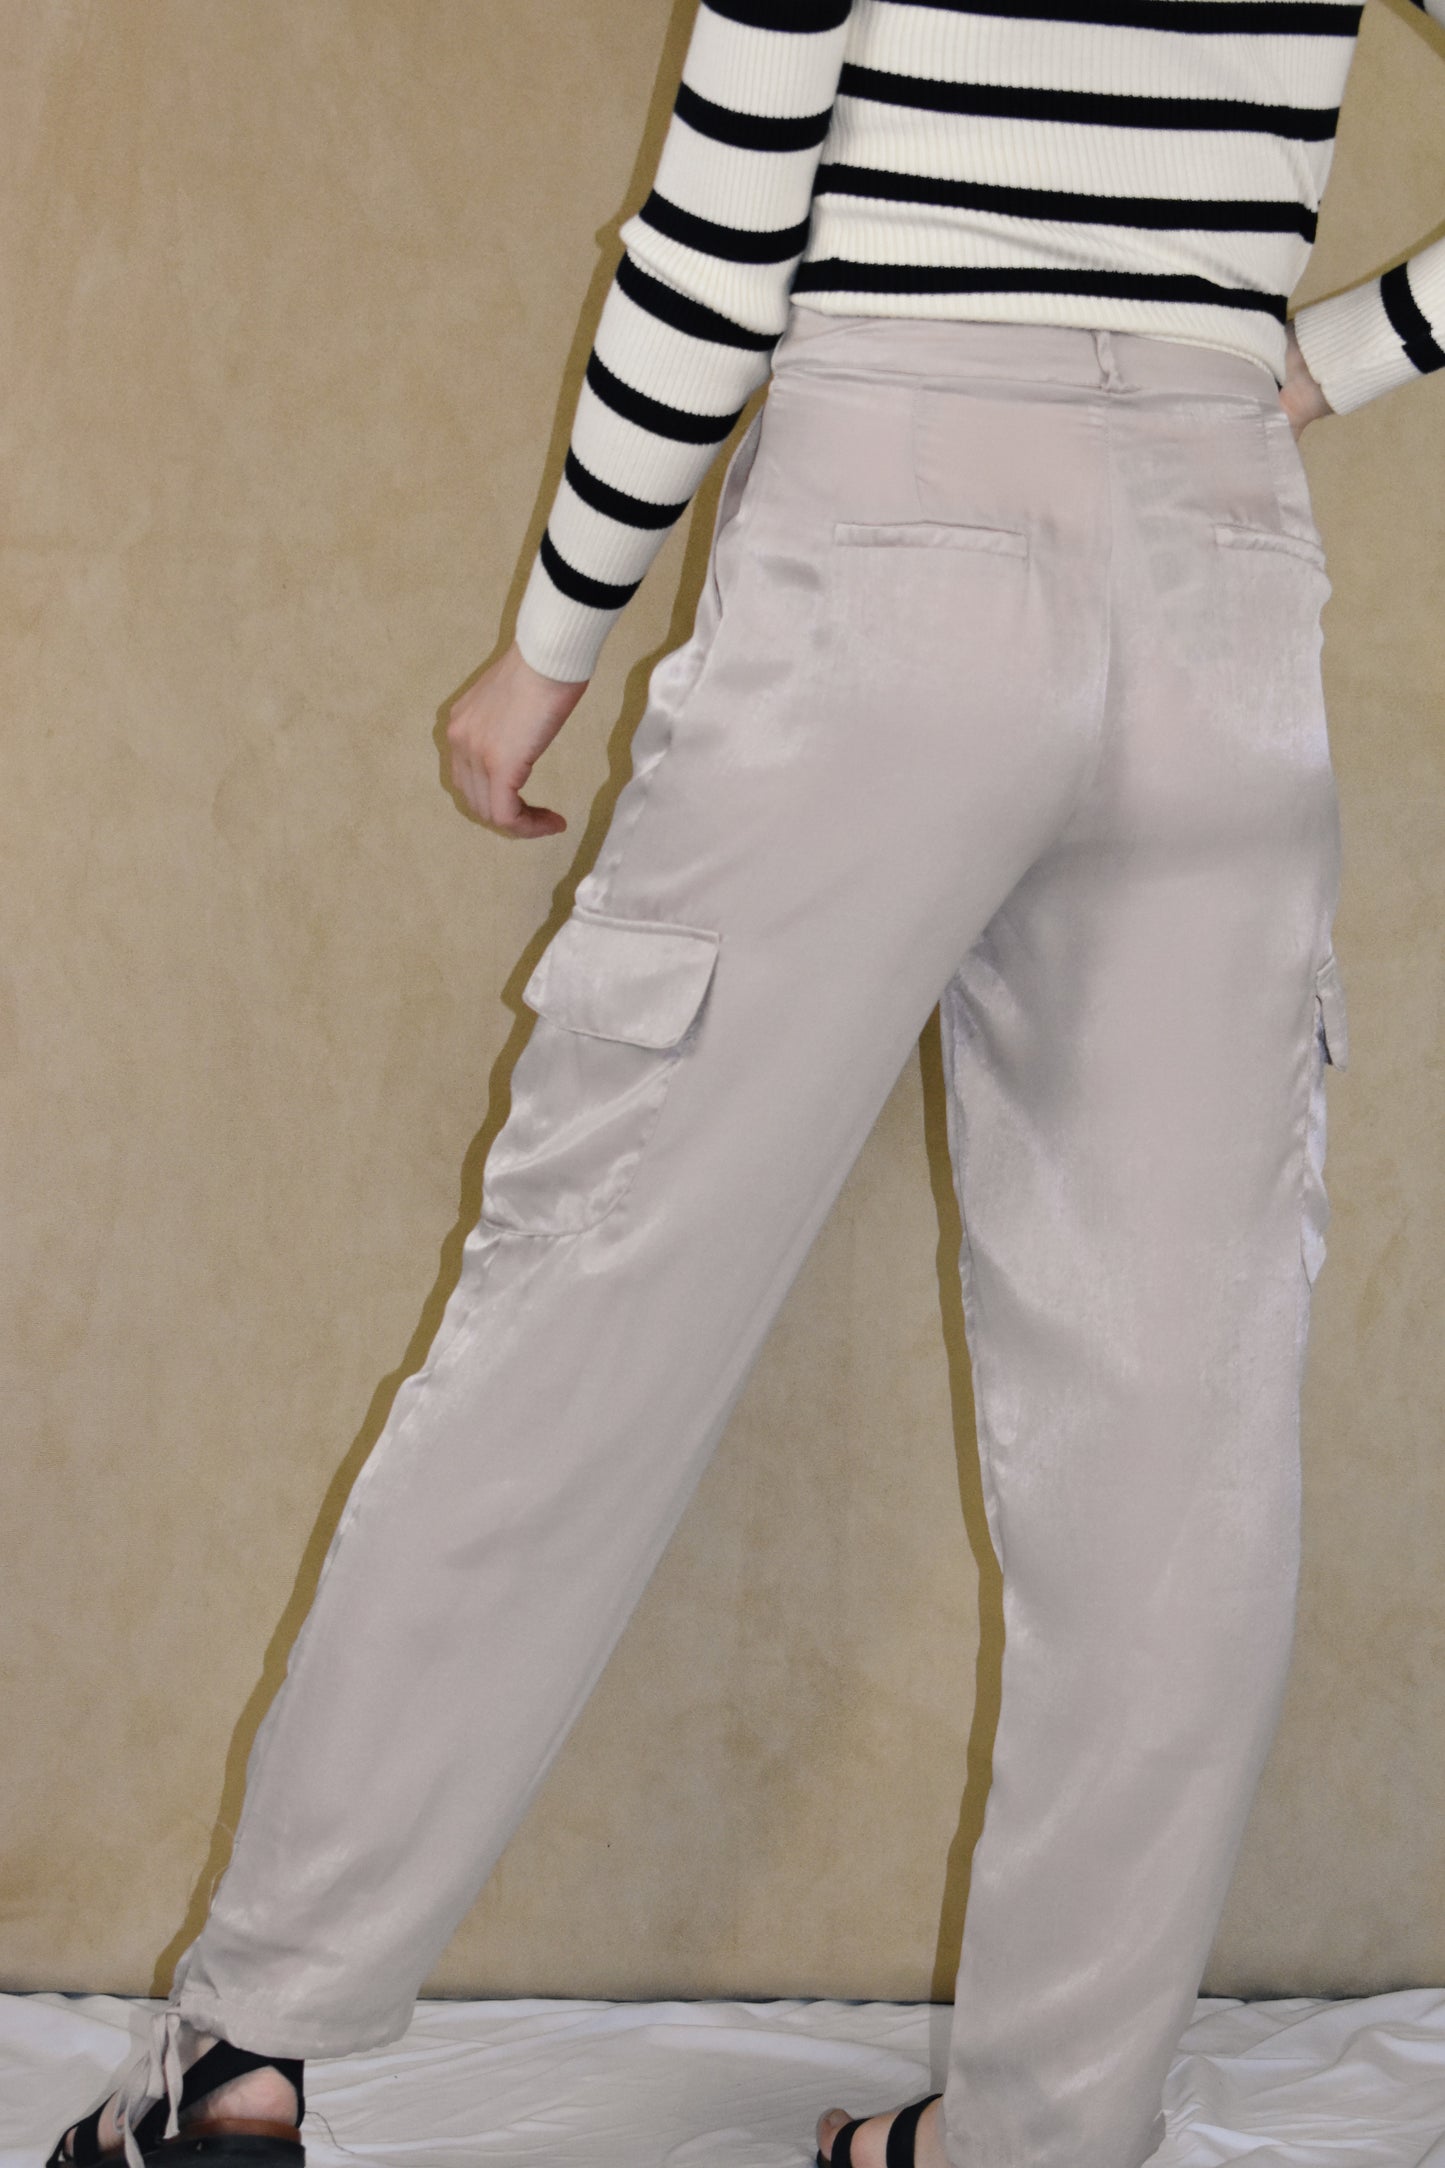 dusty rose satin cargo pants. side pockets with top flap and drawstring on the bottom.